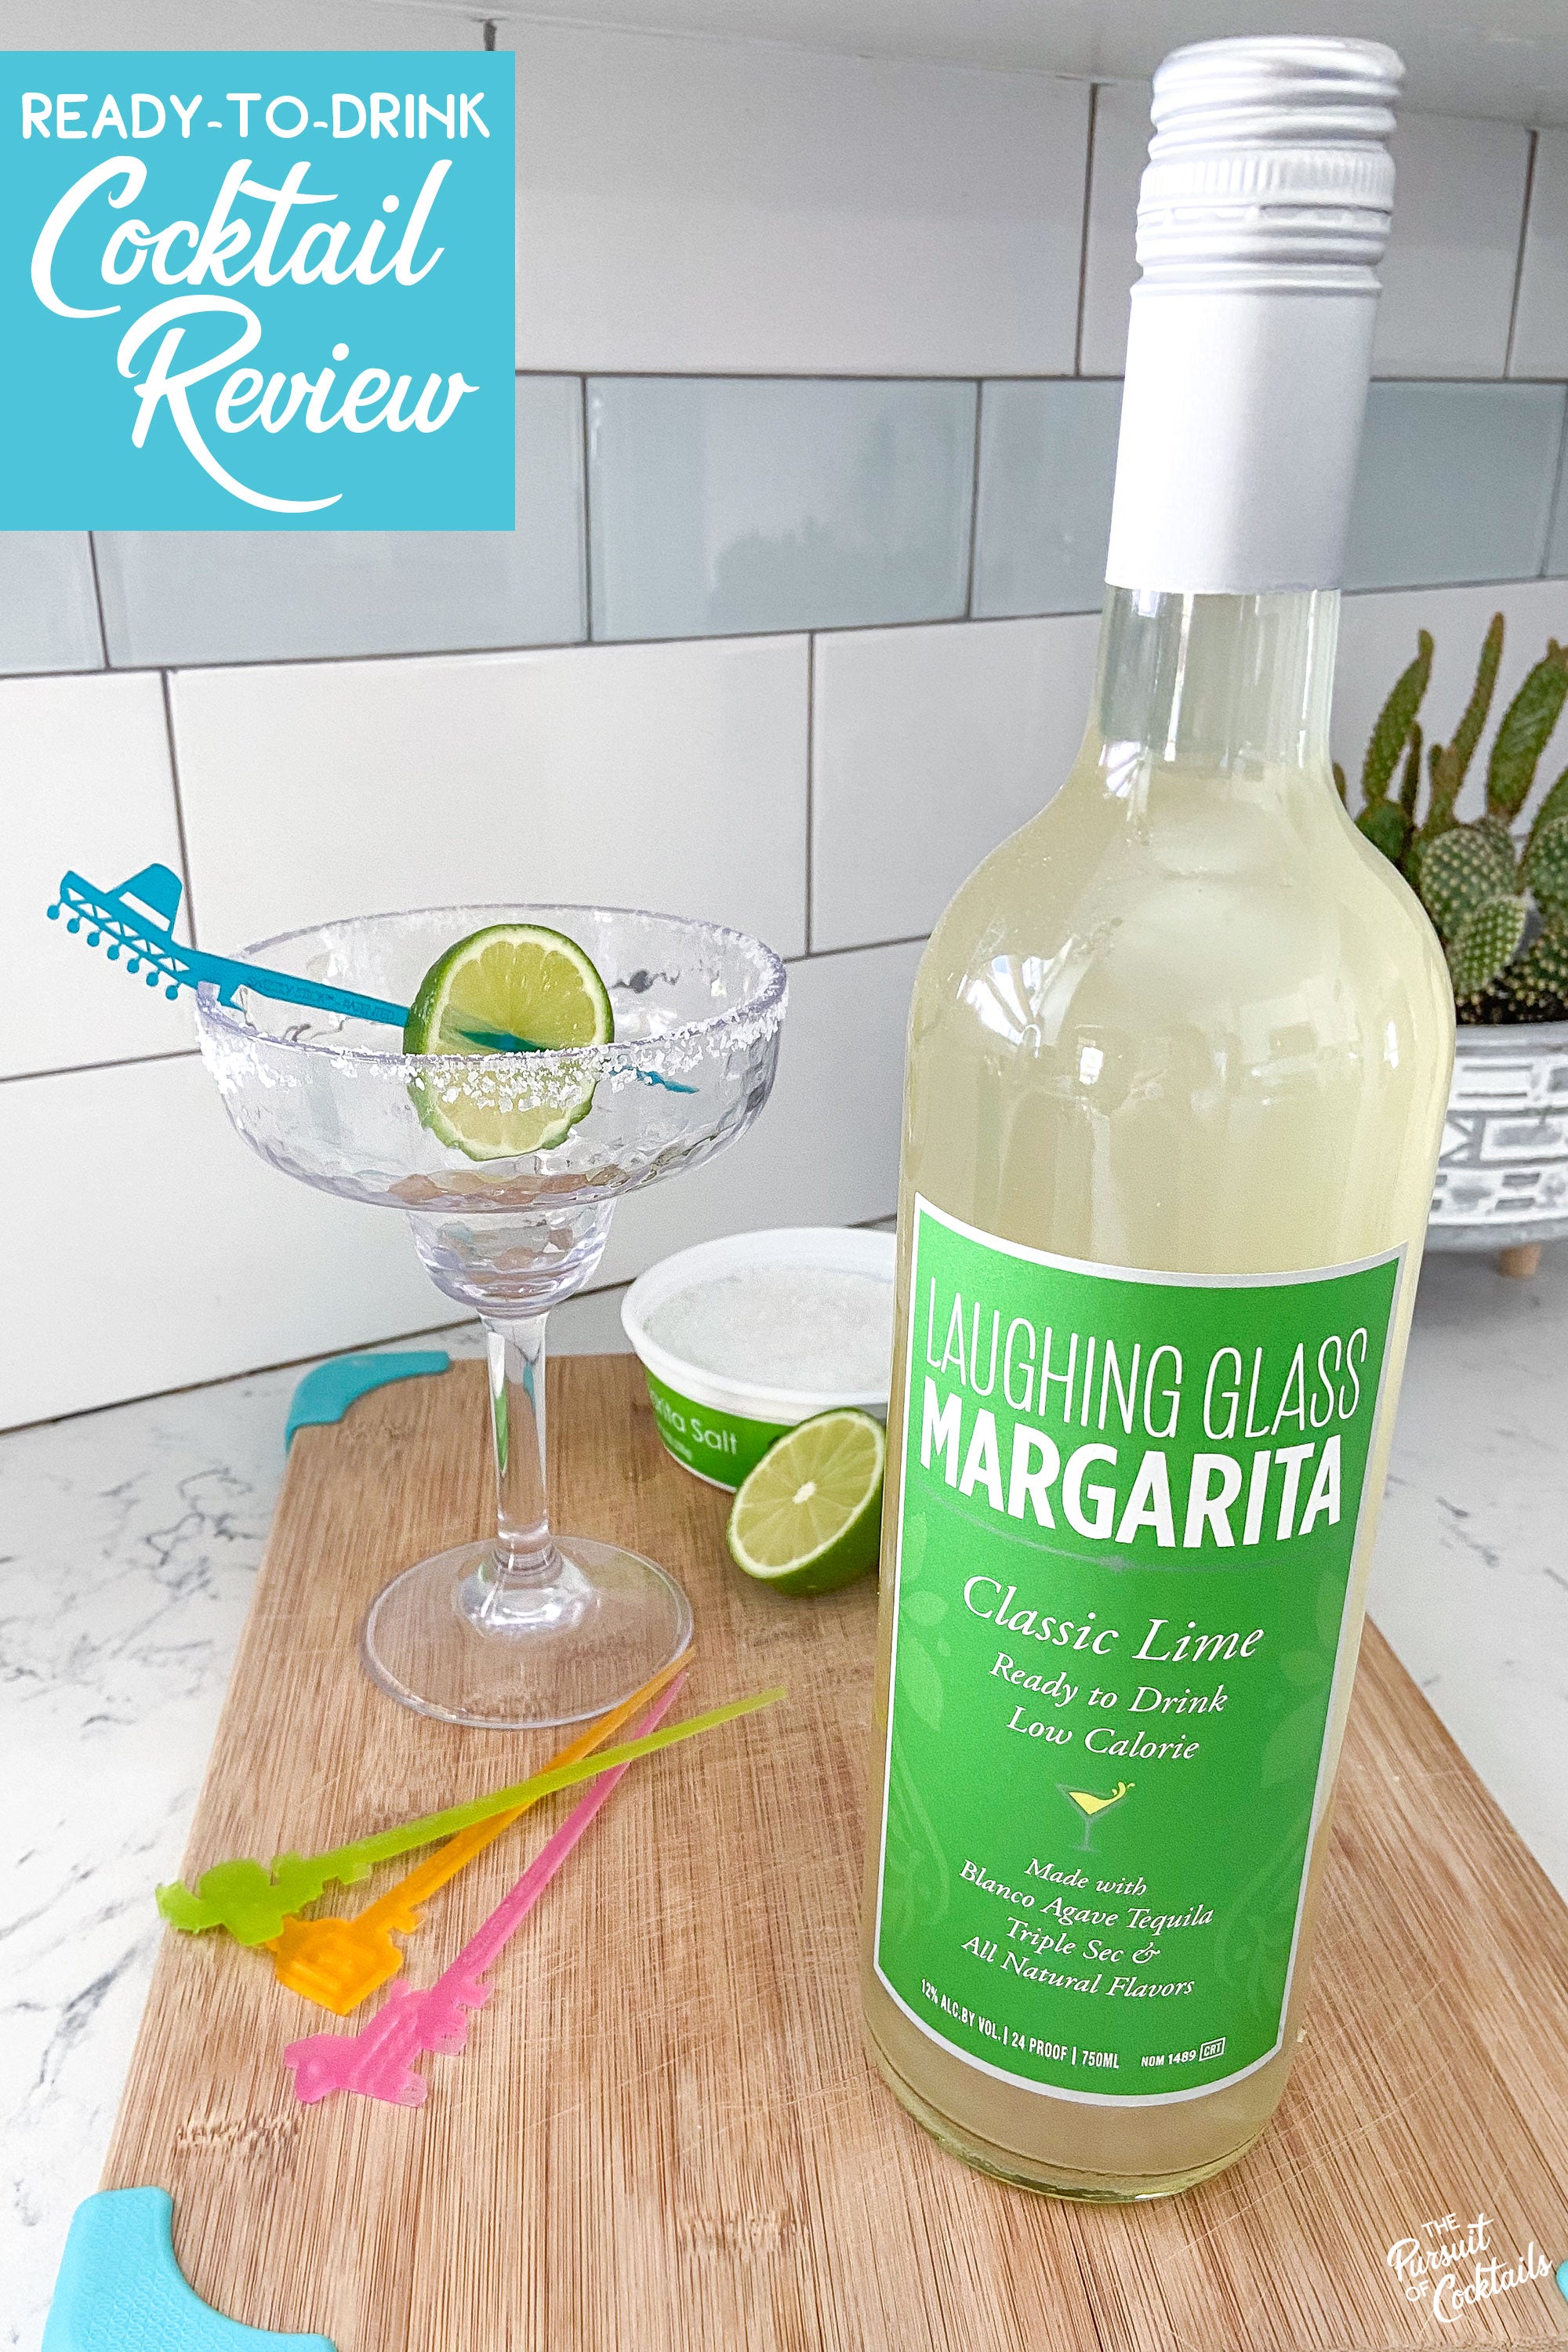 https://cdn.shopify.com/s/files/1/0251/4949/files/Laughing-Glass-ready-to-drink-margarita-review-by-The-Pursuit-of-Cocktails.jpg?v=1619750810